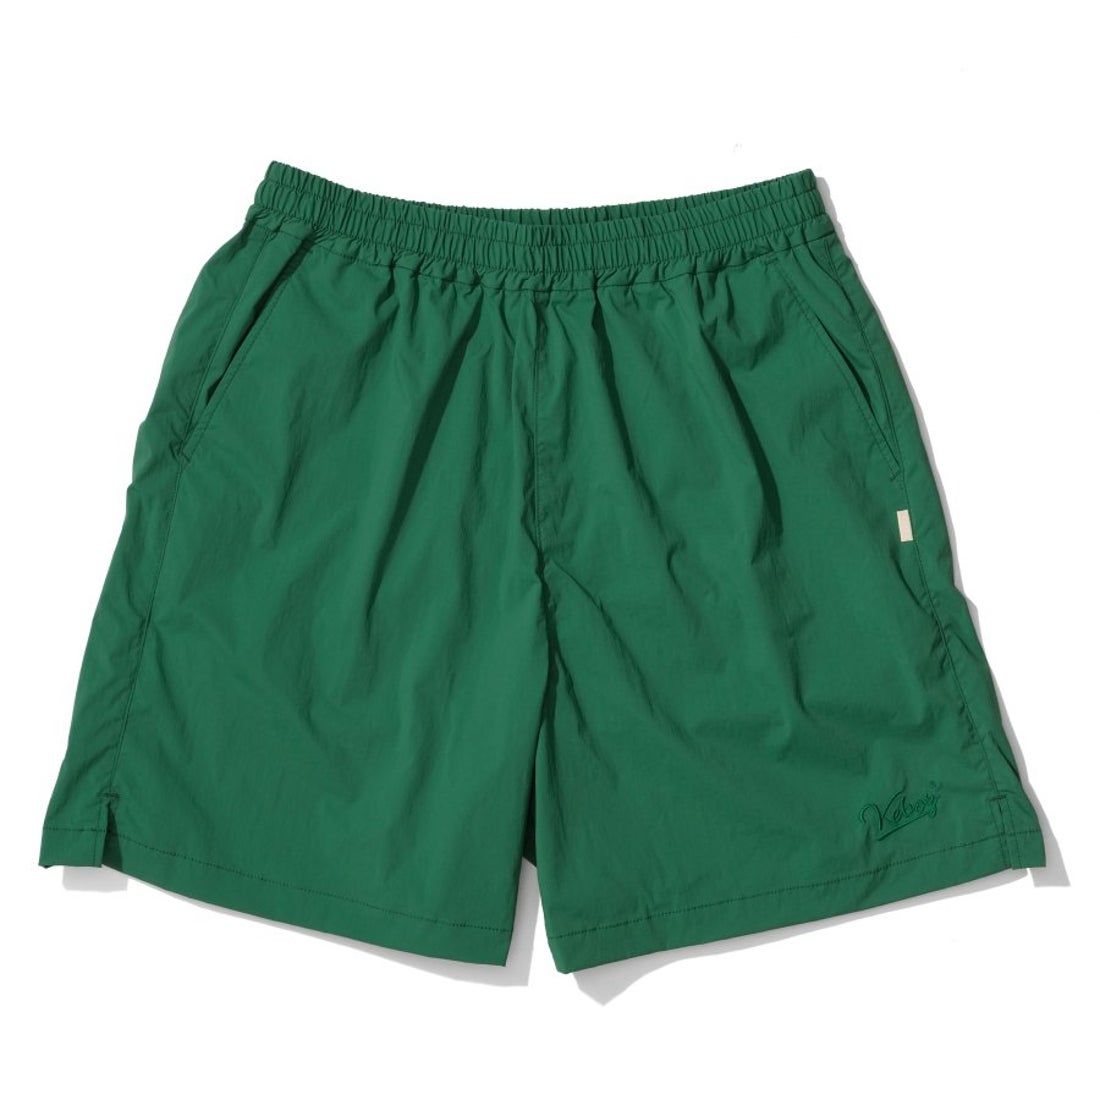 KEBOZ SPECIAL LOGO SHORTS セットアップ